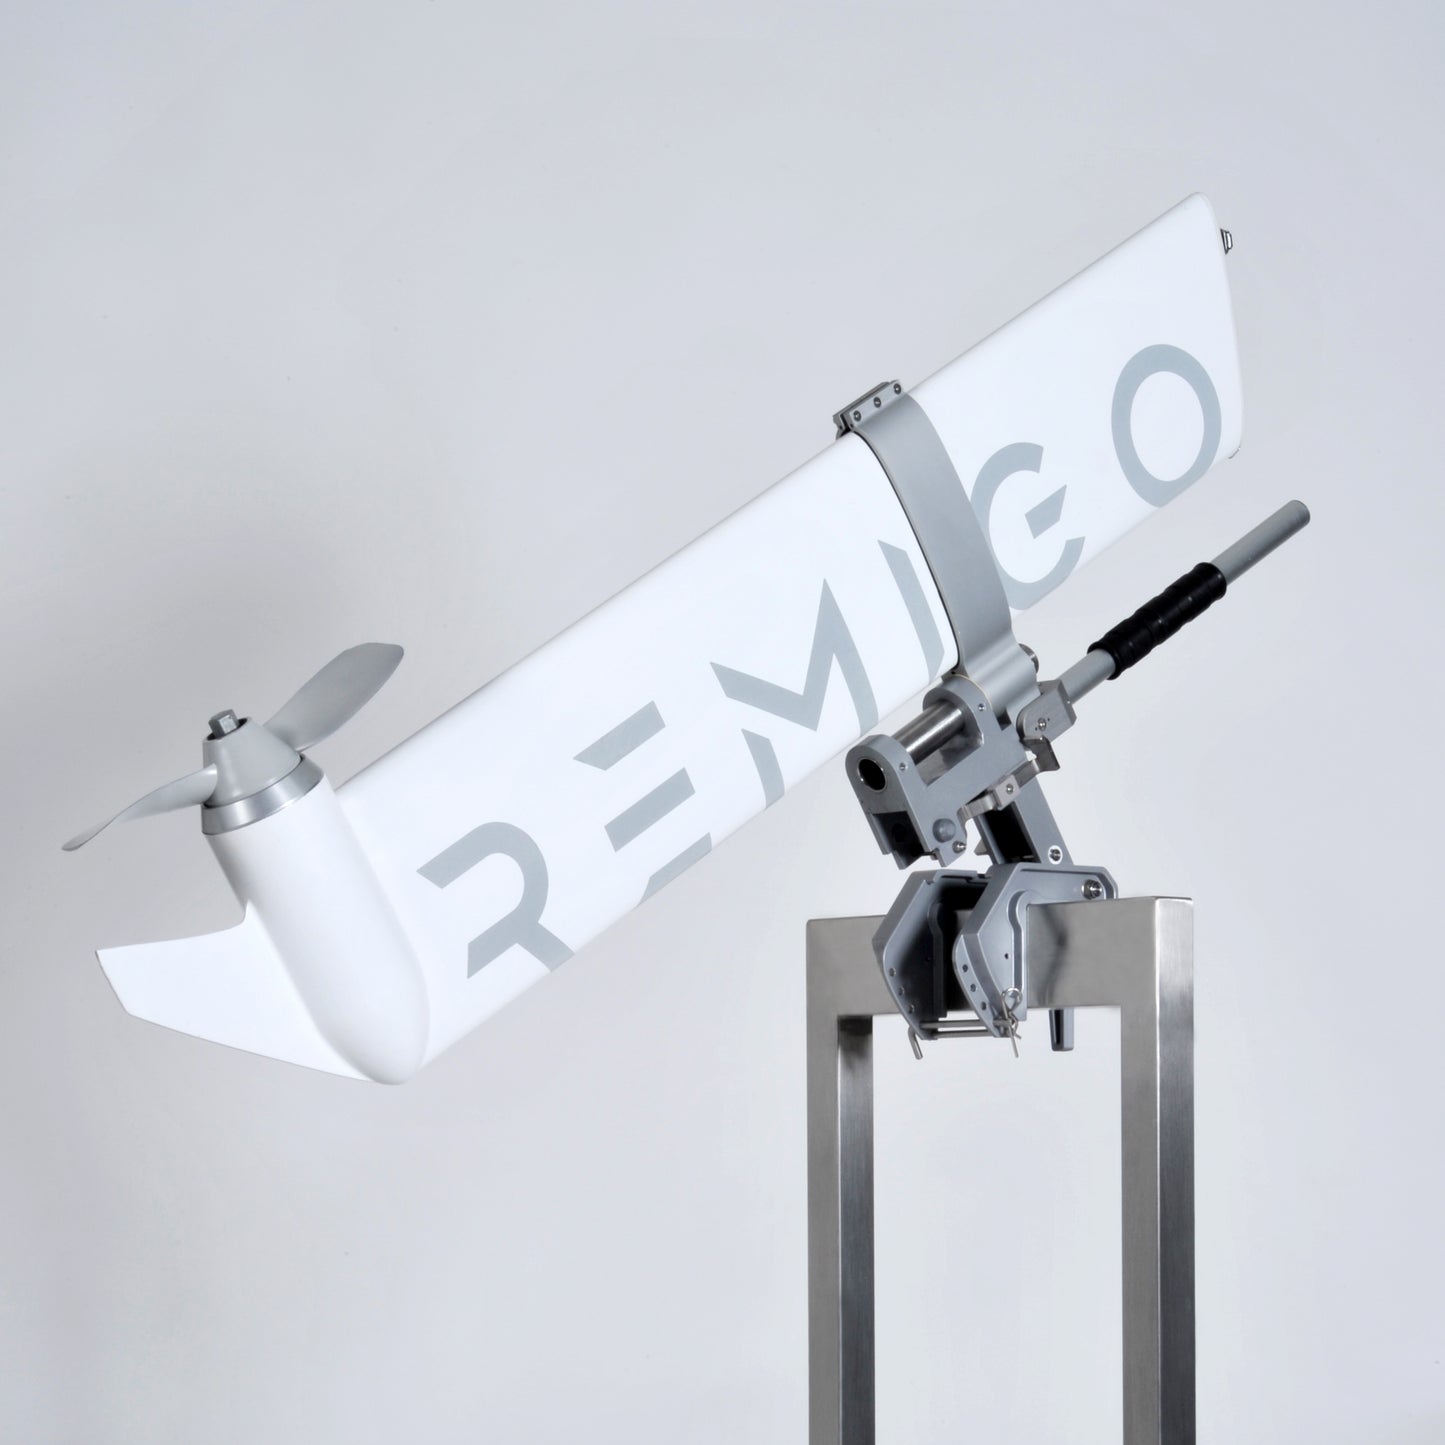 RemigoOne electric outboard motor